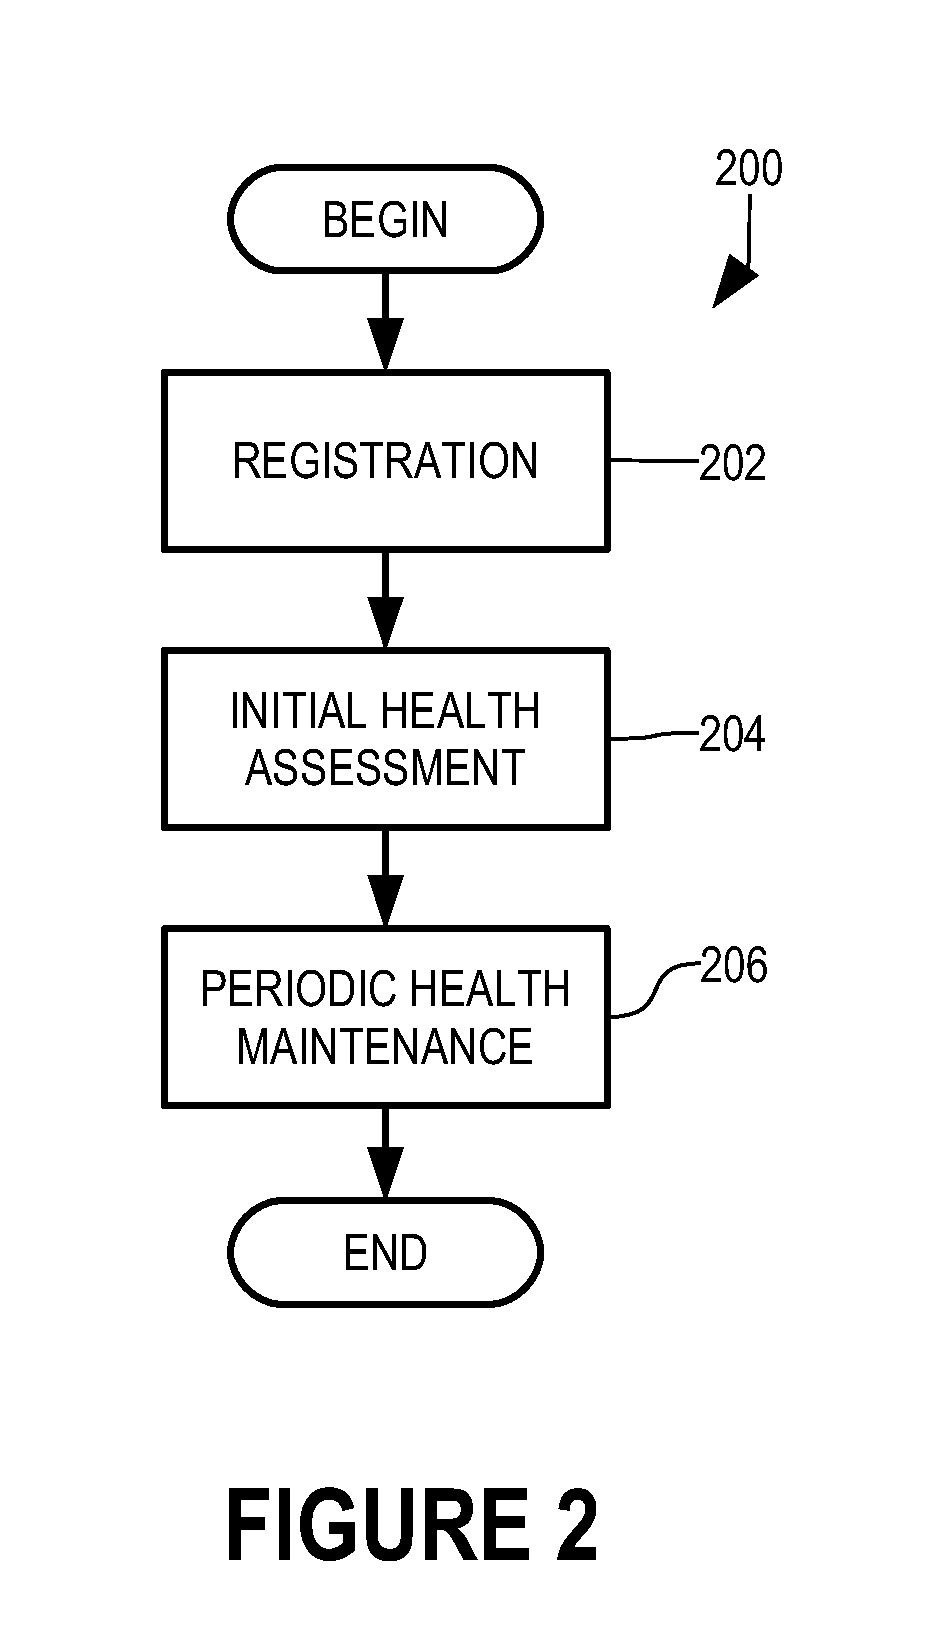 Health assessment by remote physical examination